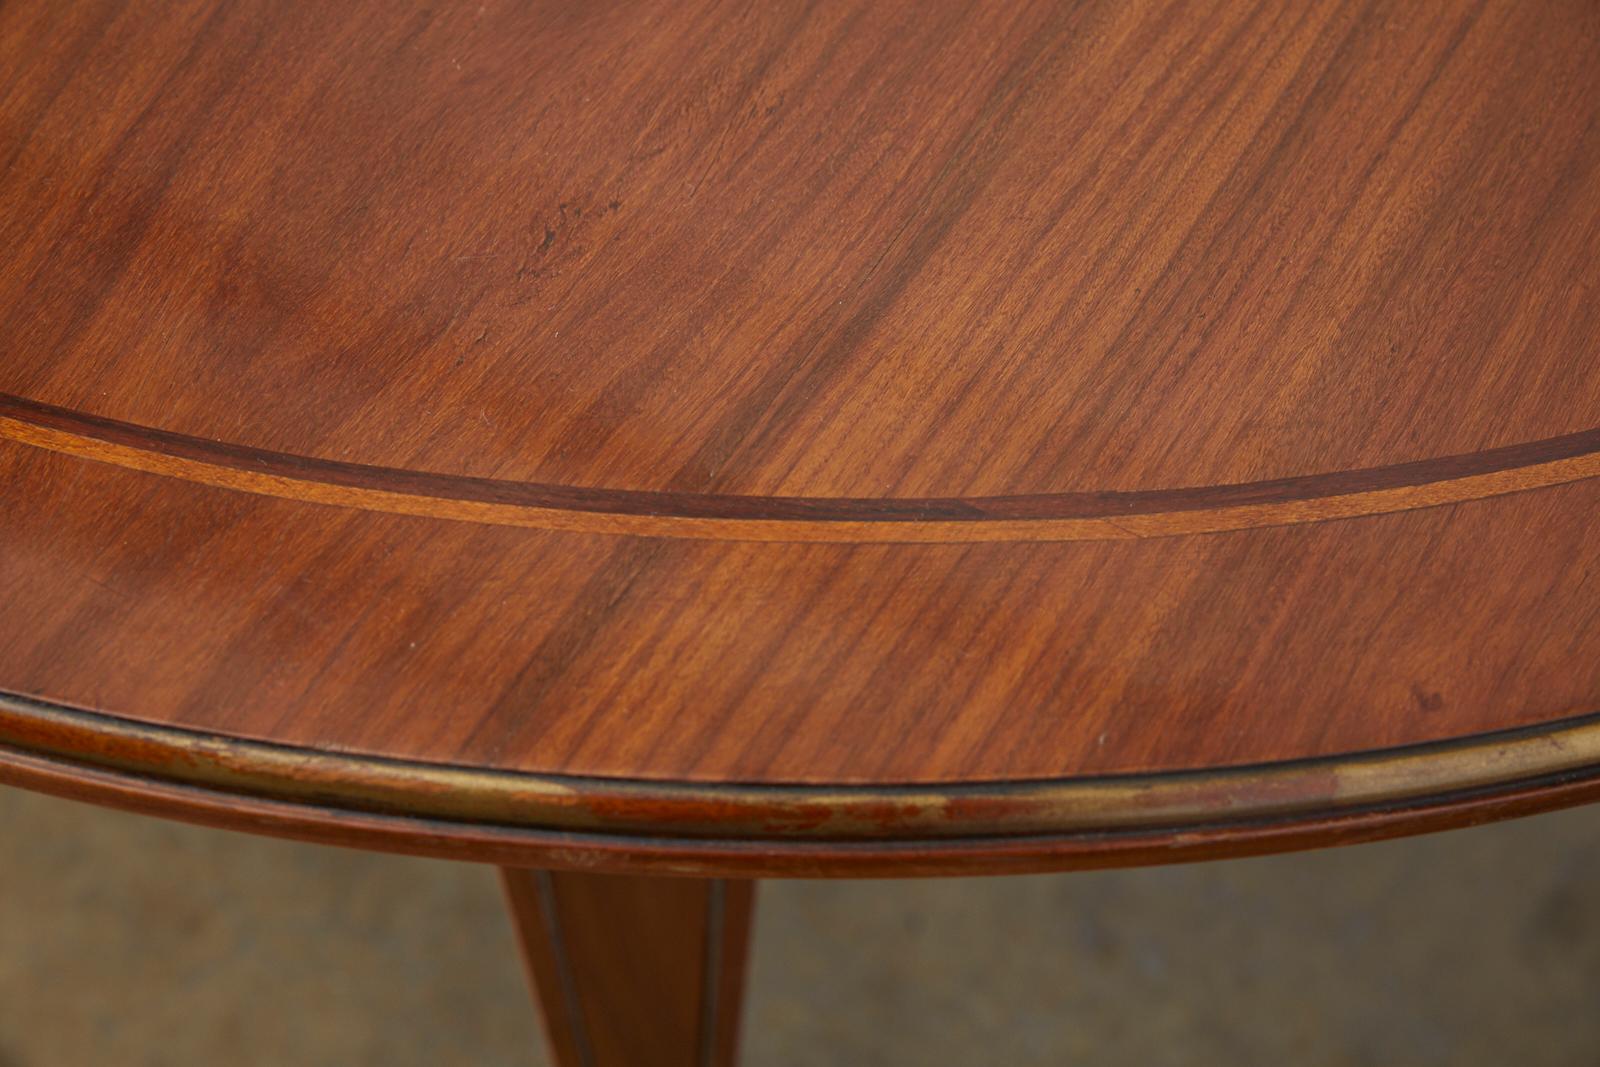 Maison Jansen Round Mahogany Dining Table with Leaf 5